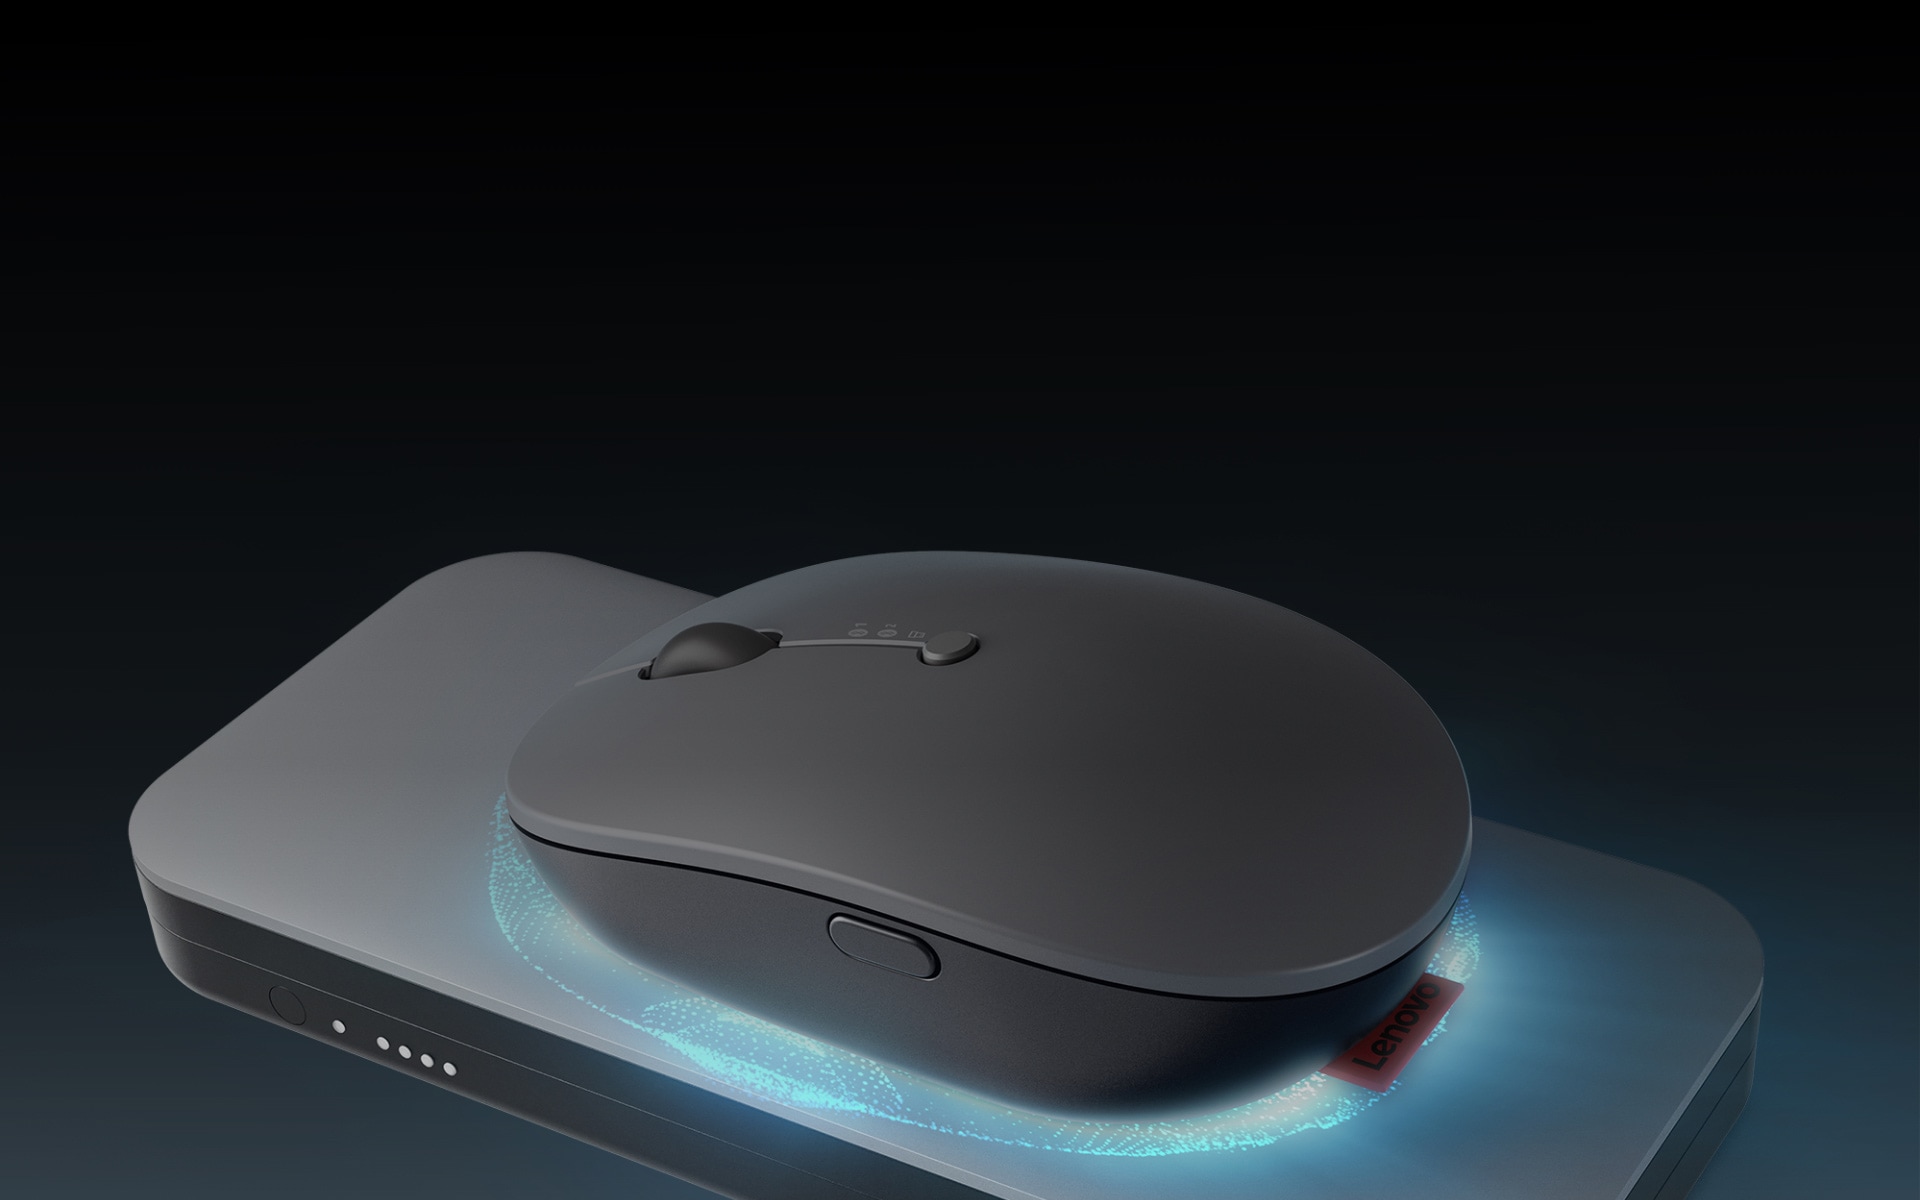 Lenovo Go Wireless Multi-Device Mouse charging on wireless charger